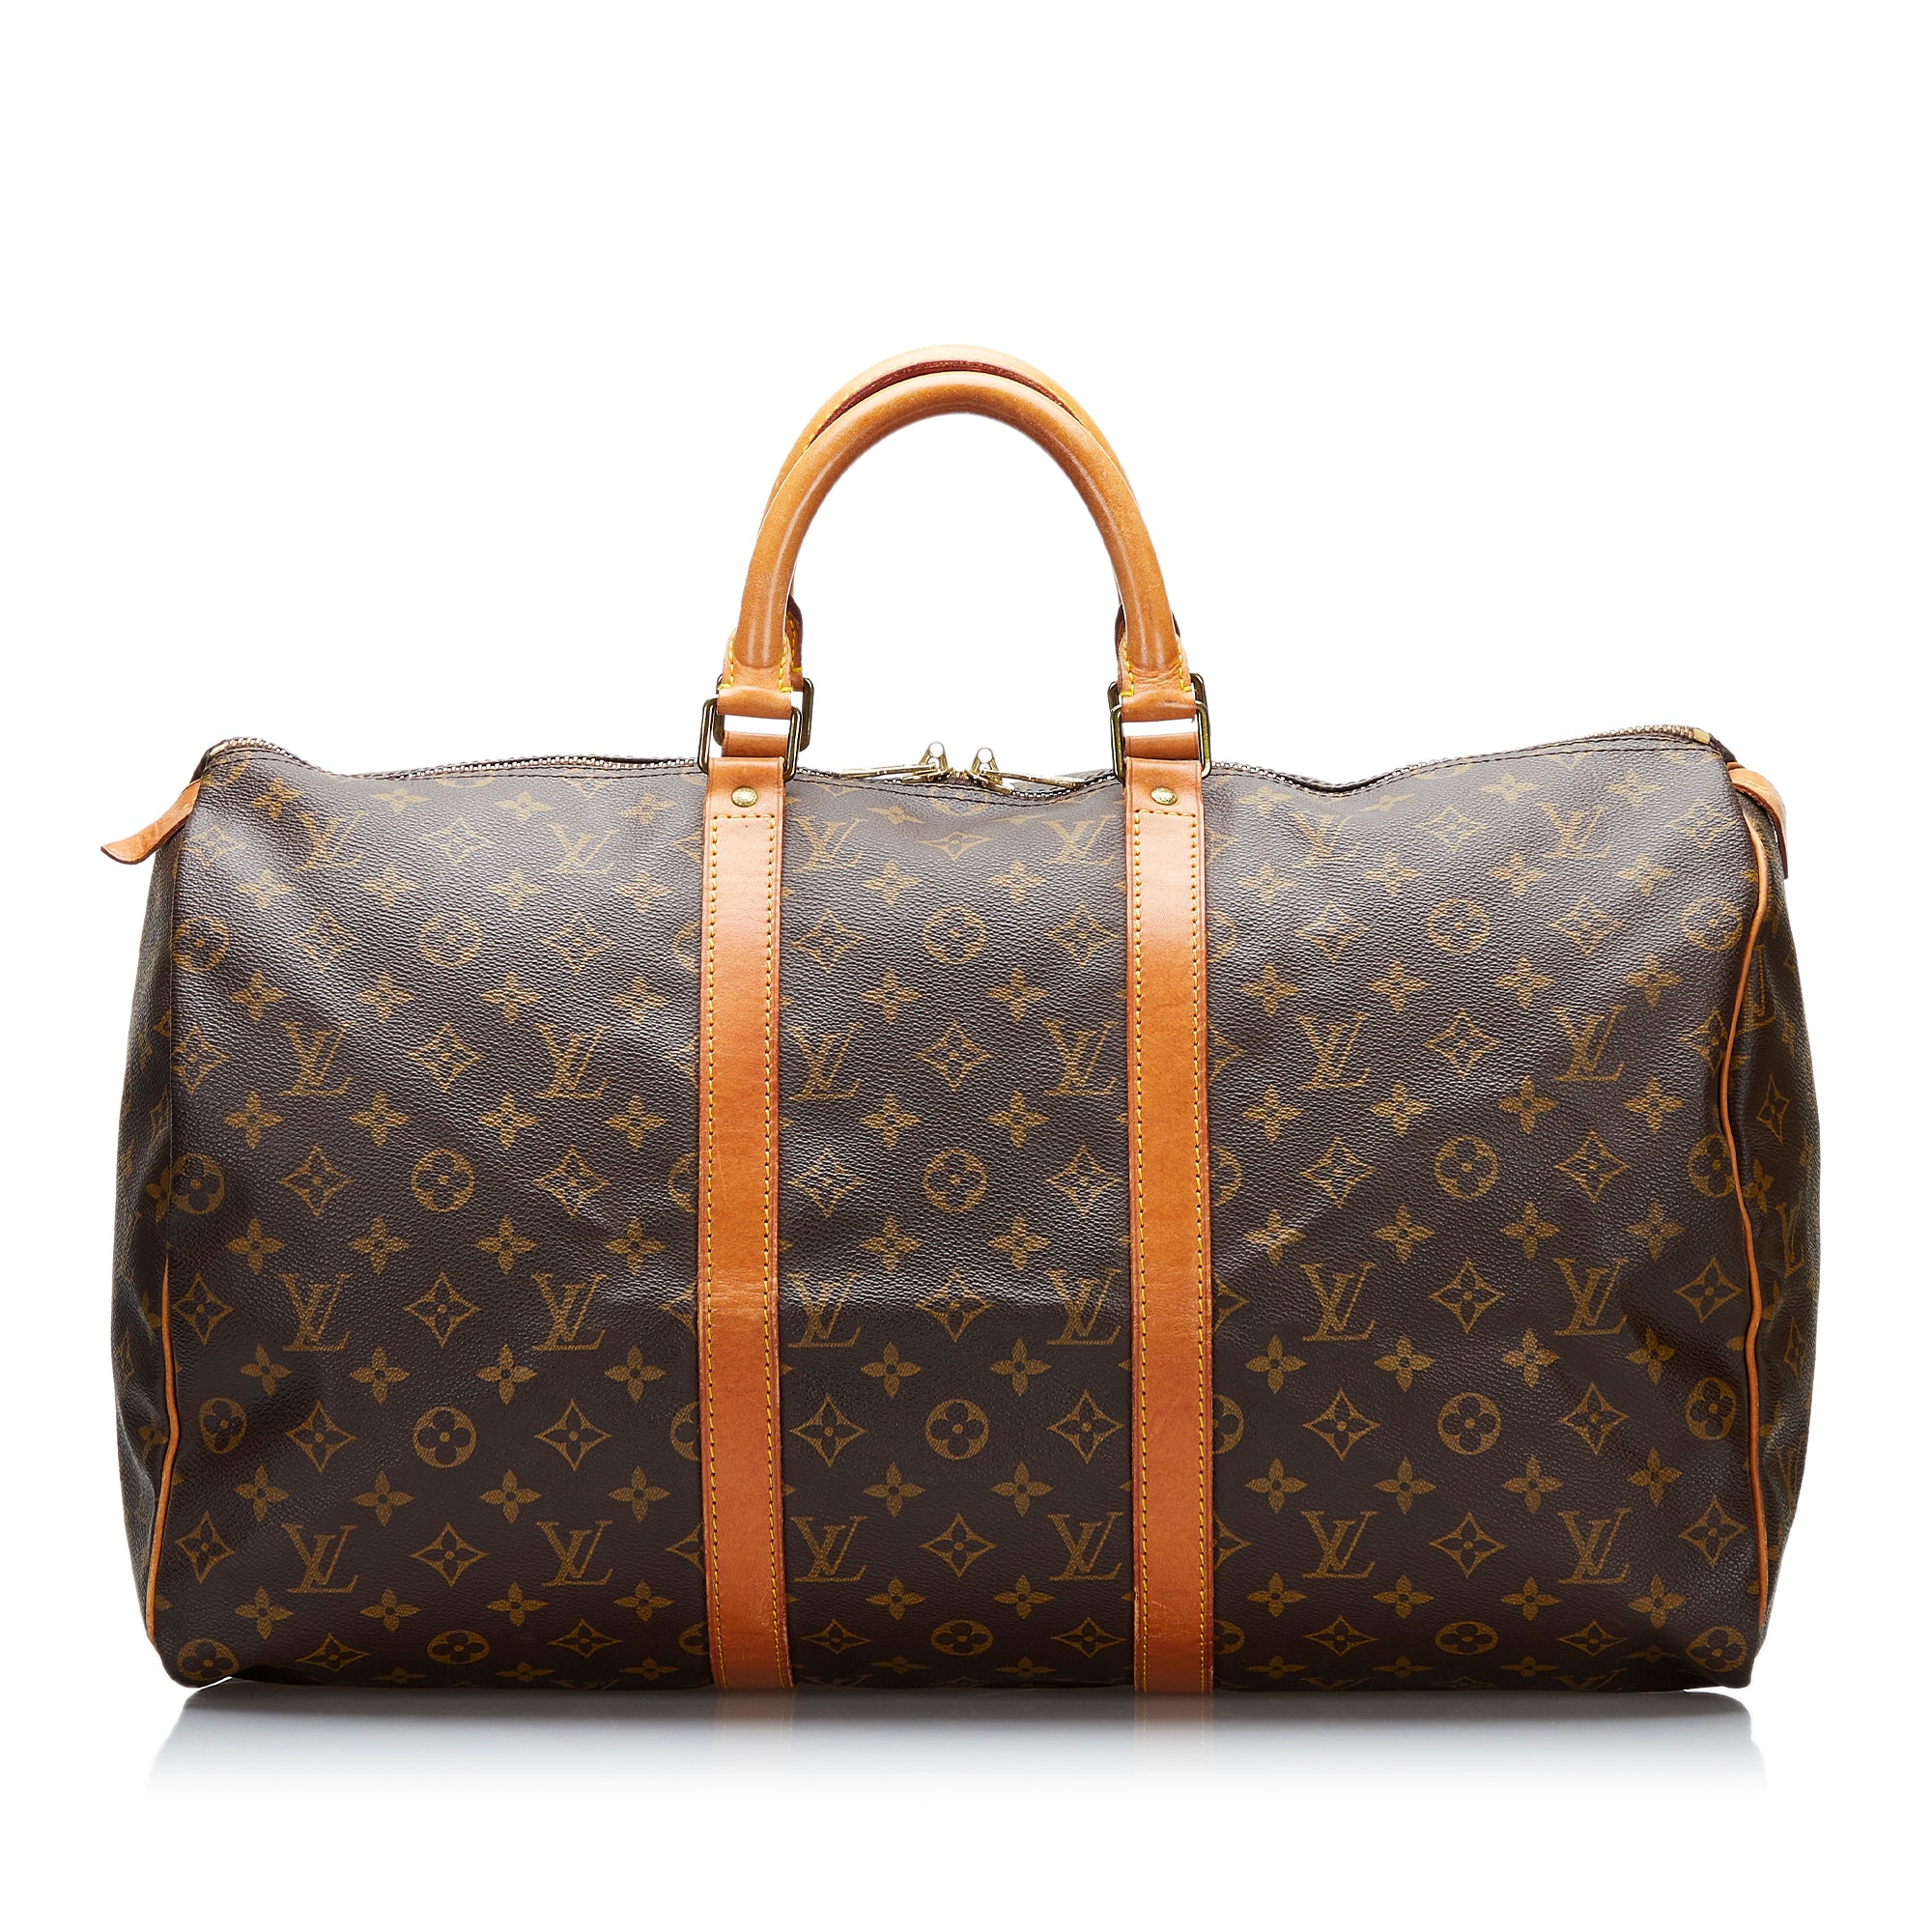 Ba Lô Louis Vuitton Keepall Bandouliere 50 Damier Other Travel BLV04 siêu  cấp like auth 99  DUONG STORE 